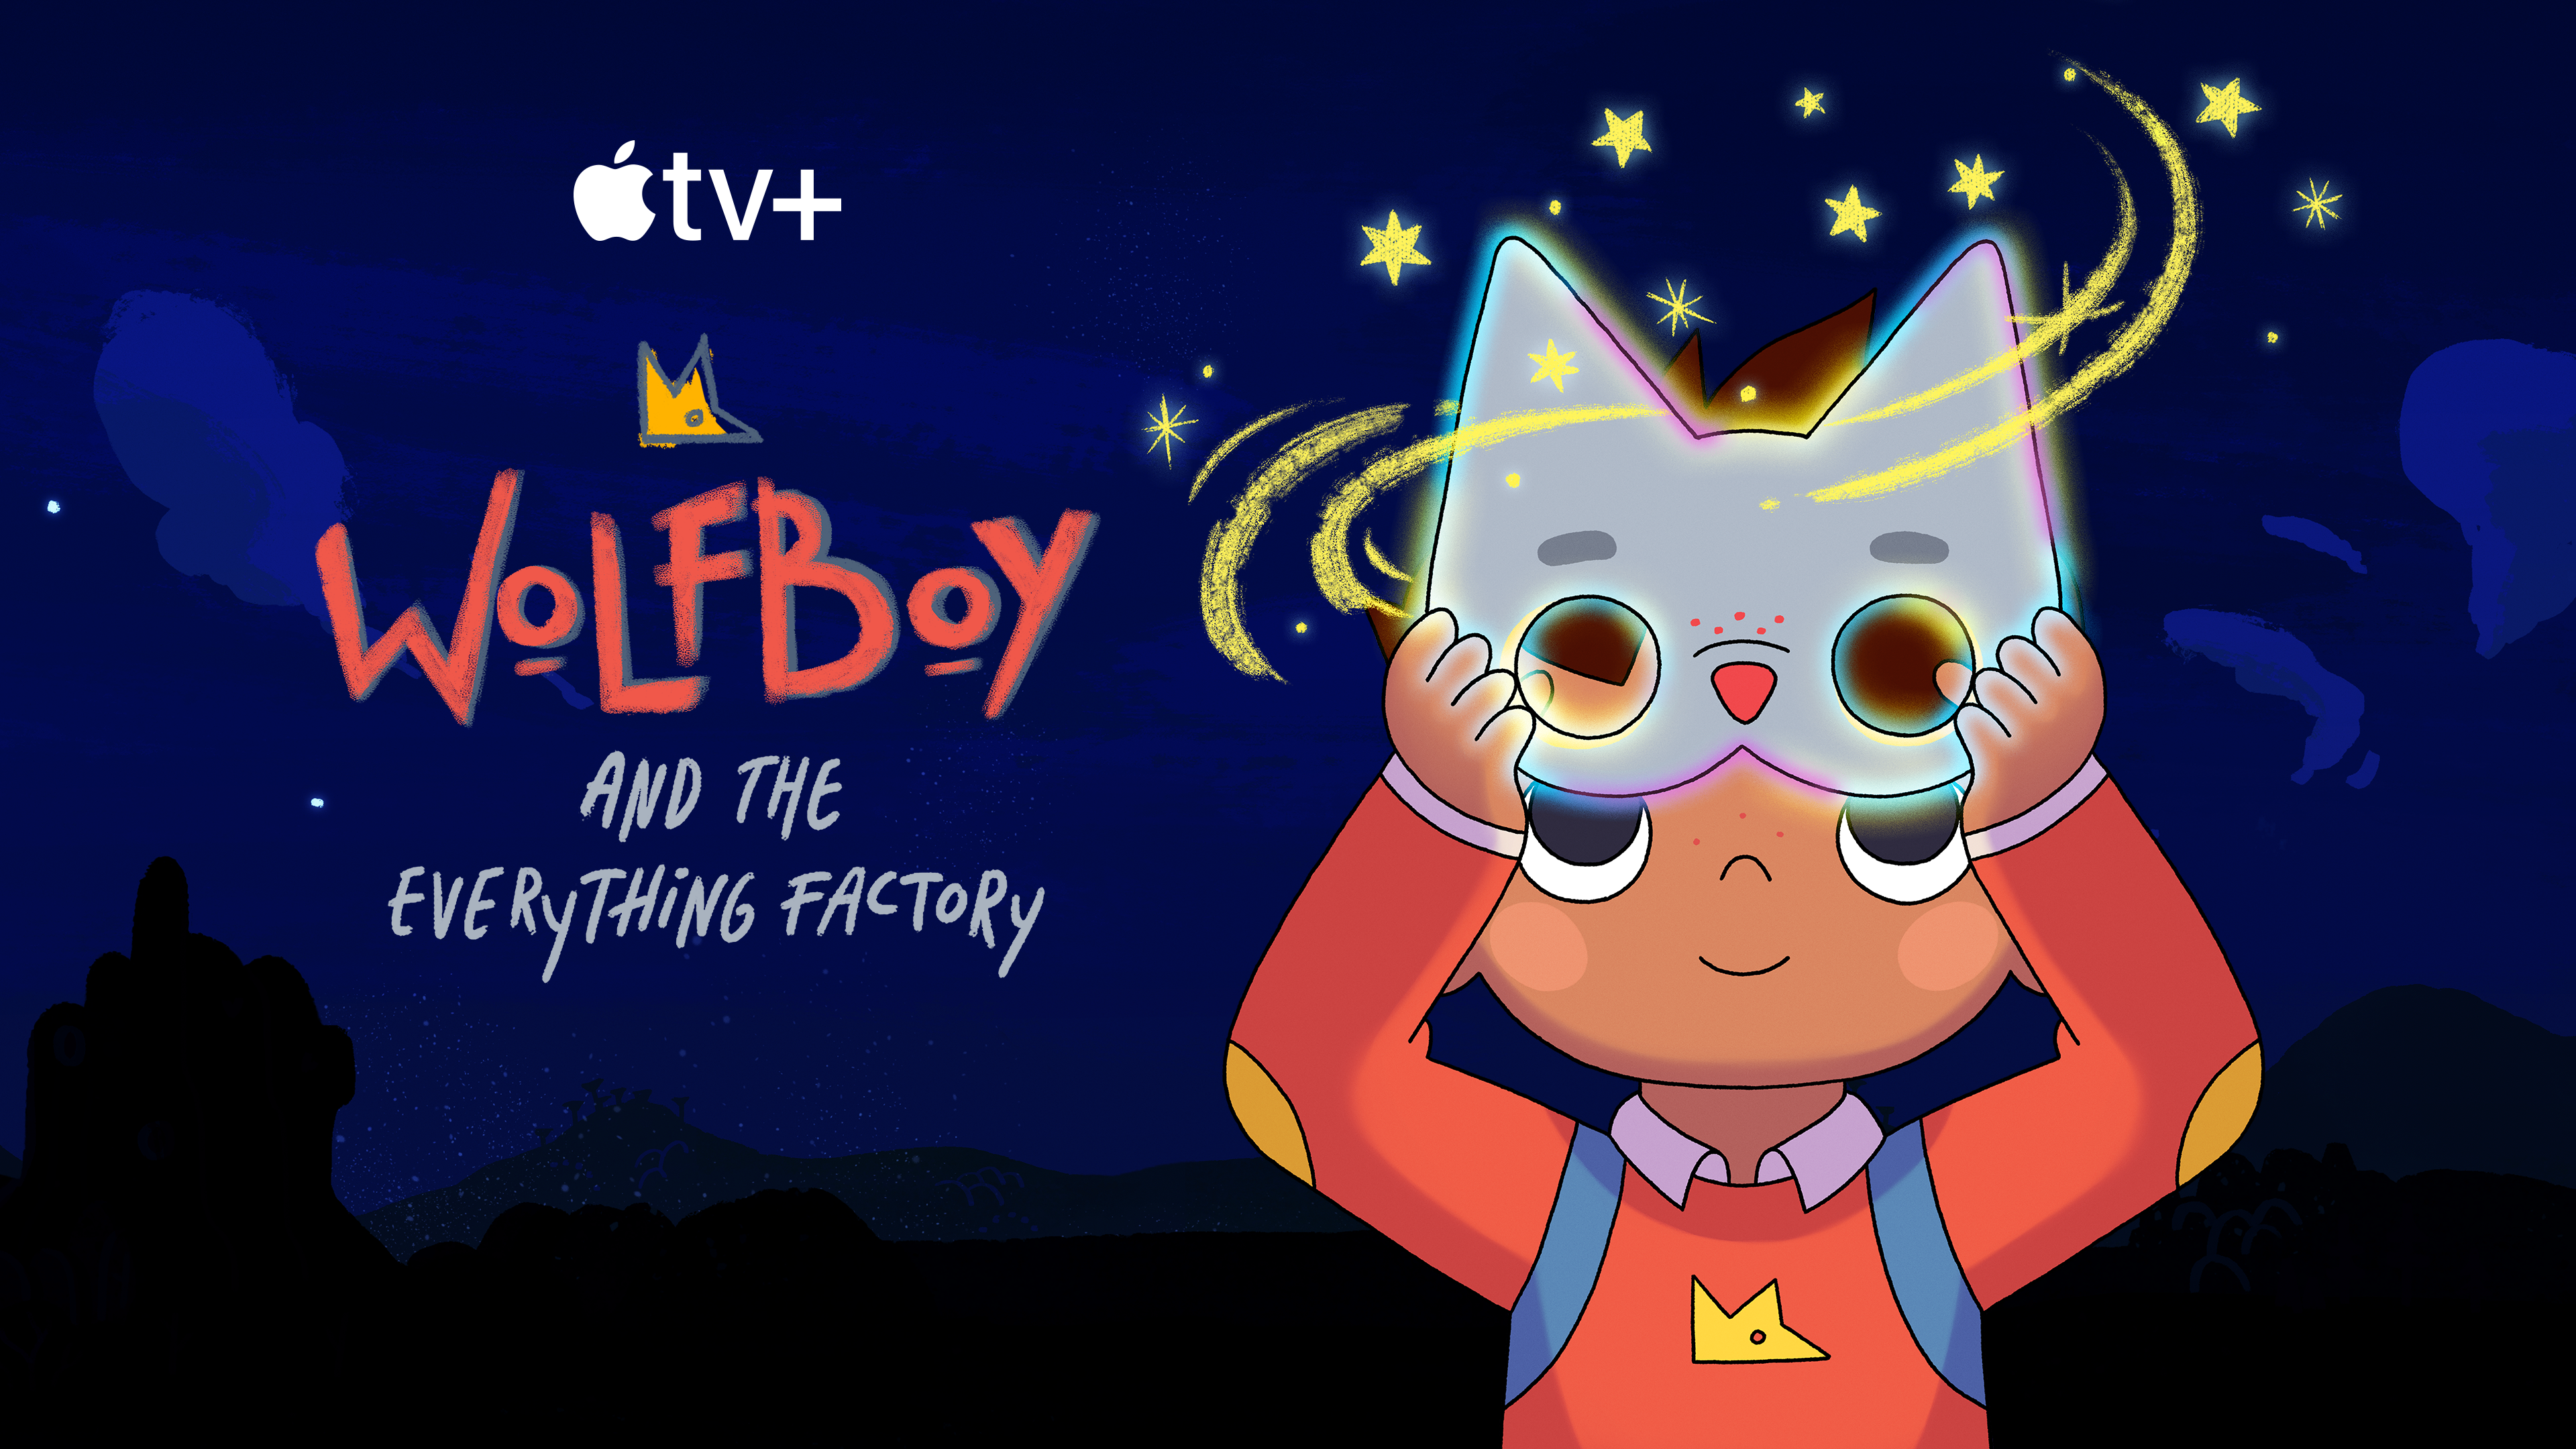 Wolfboy and The Everything Factory 4k Ultra HD Wallpaper